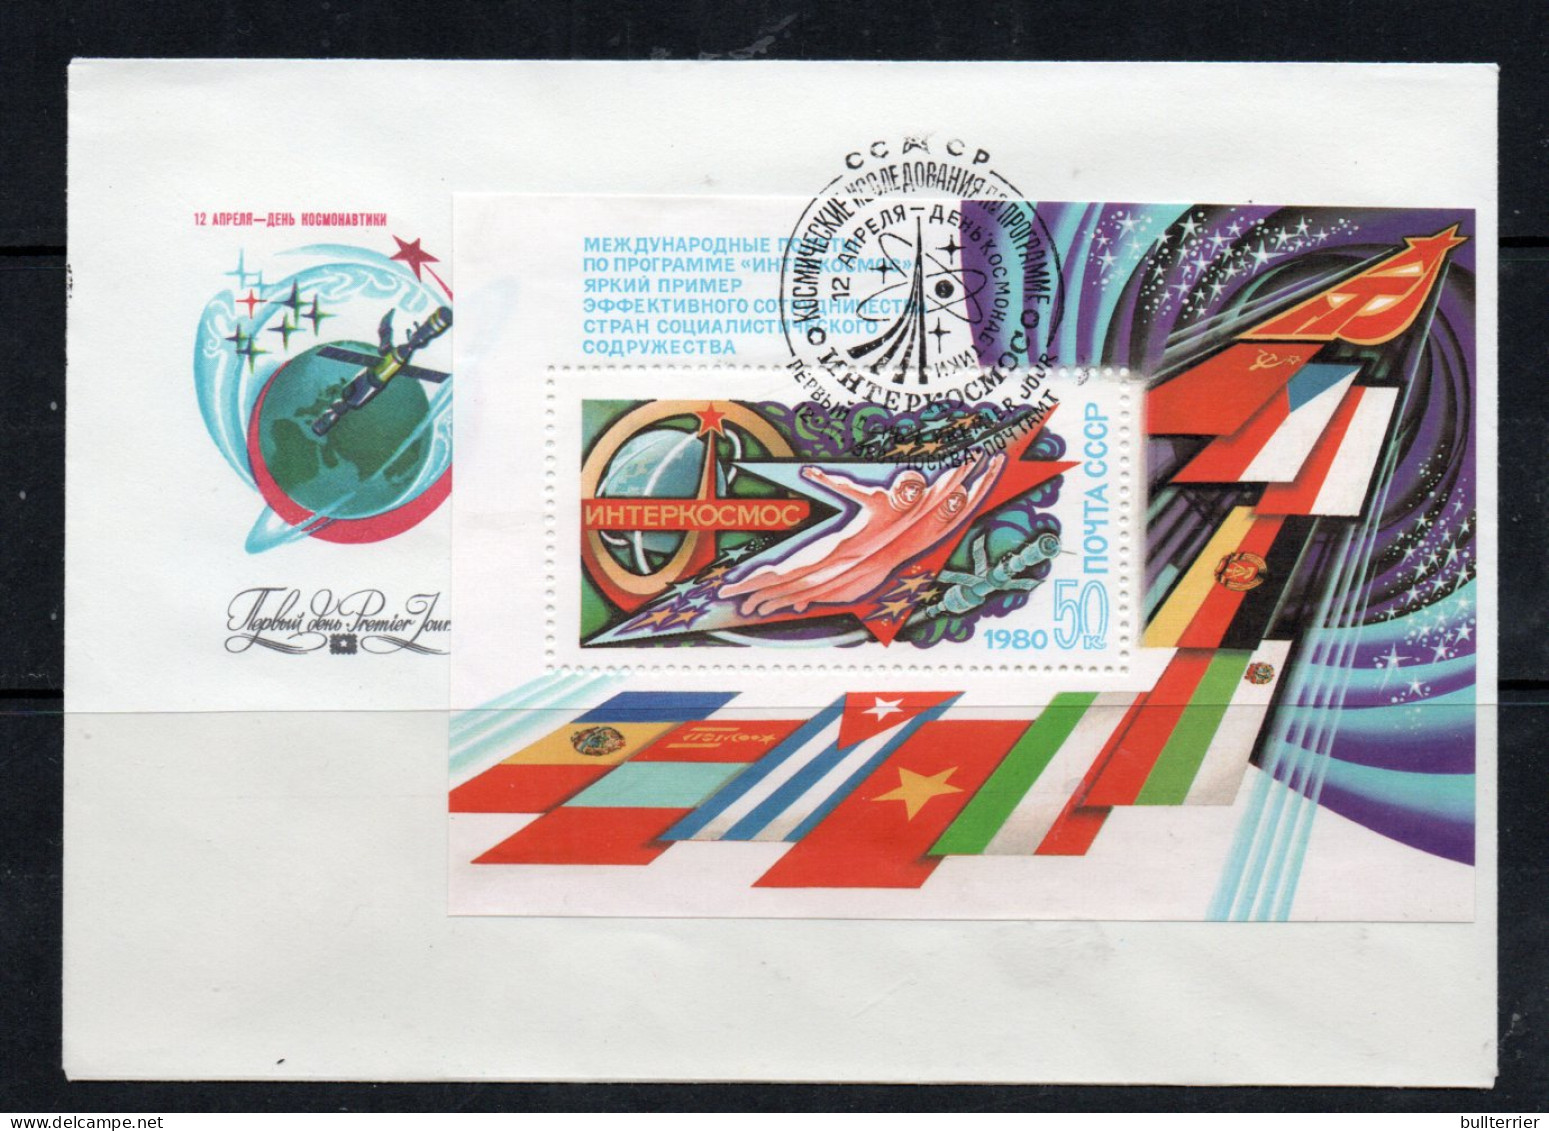 SPACE - USSR - 1980 - INTERCOSMOS SOUVENIR SHEET ON  ILLUSTRATED FDC   - Russia & USSR